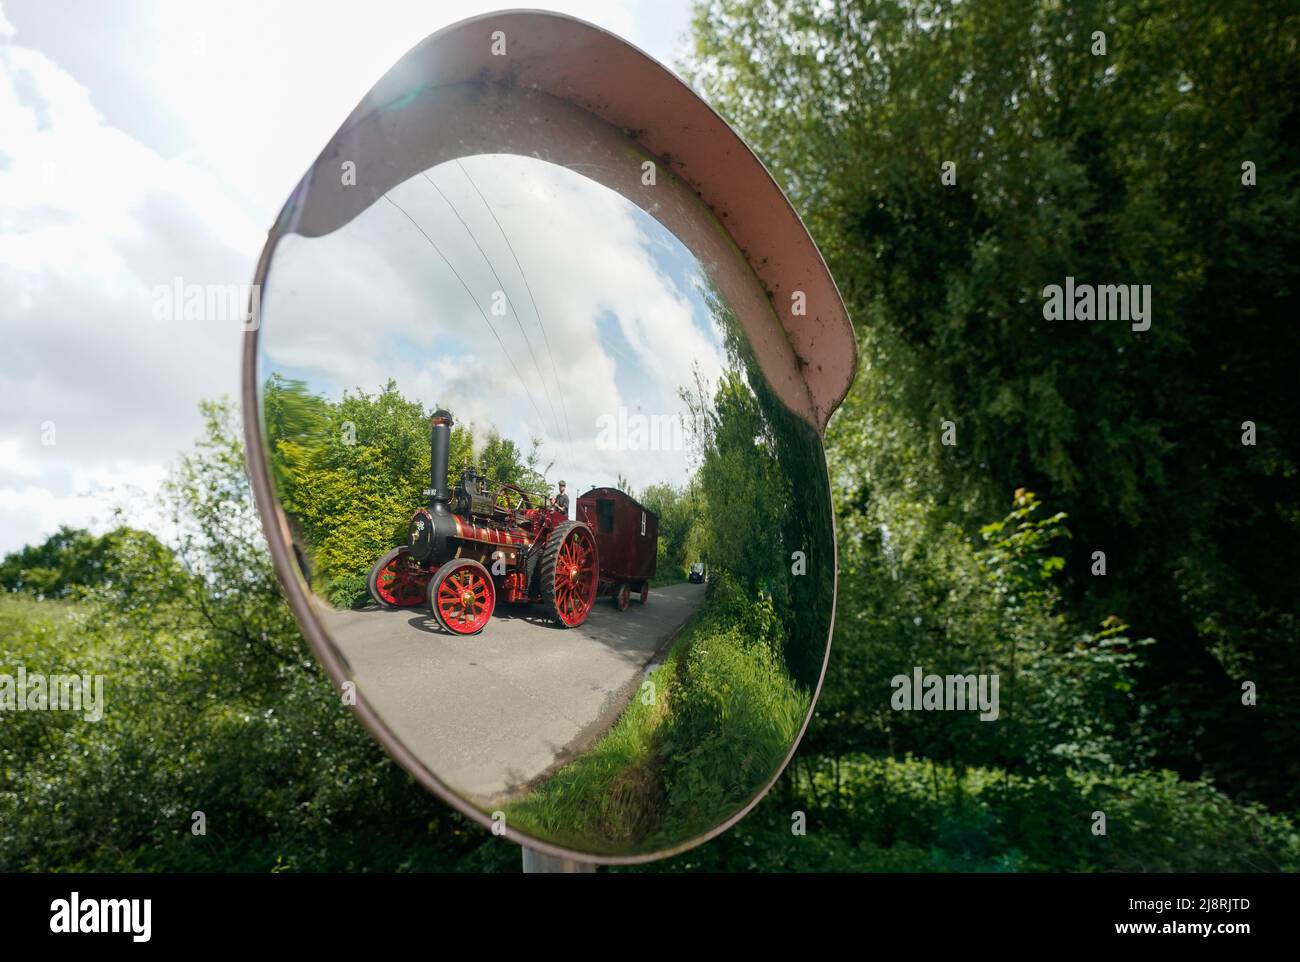 The Foden General Purpose Engine 3384, 'Wattie Pollock' is reflected in a mirror as it is driven along the Kimbridge Lane in Kimbridge, Hampshire, as it travels to the Mid Hants Railway, also known as the Watercress Line, to take part in their Vintage Vehicles weekend which runs from 20-22 May. Stock Photo